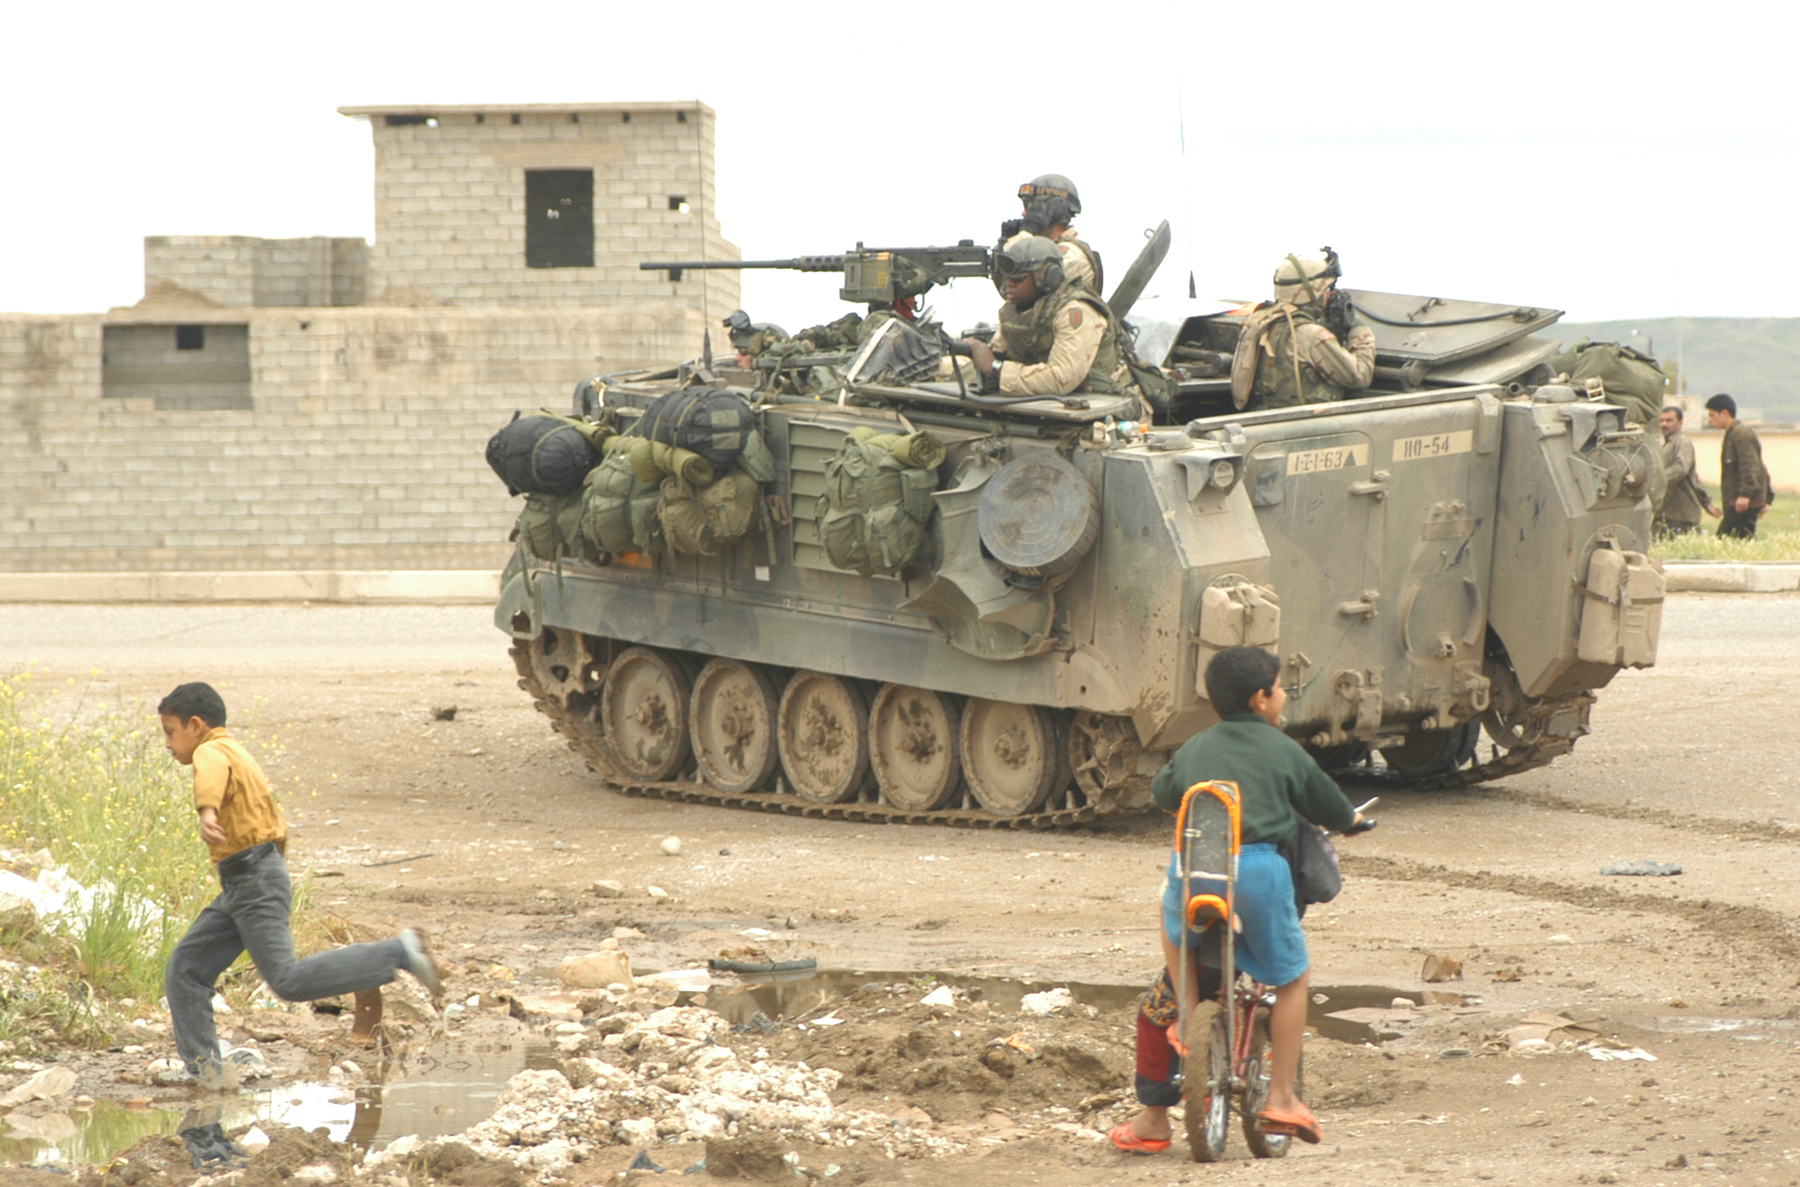 A M113 Armored Personnel Carrier patrols in Iraq, circa 2003